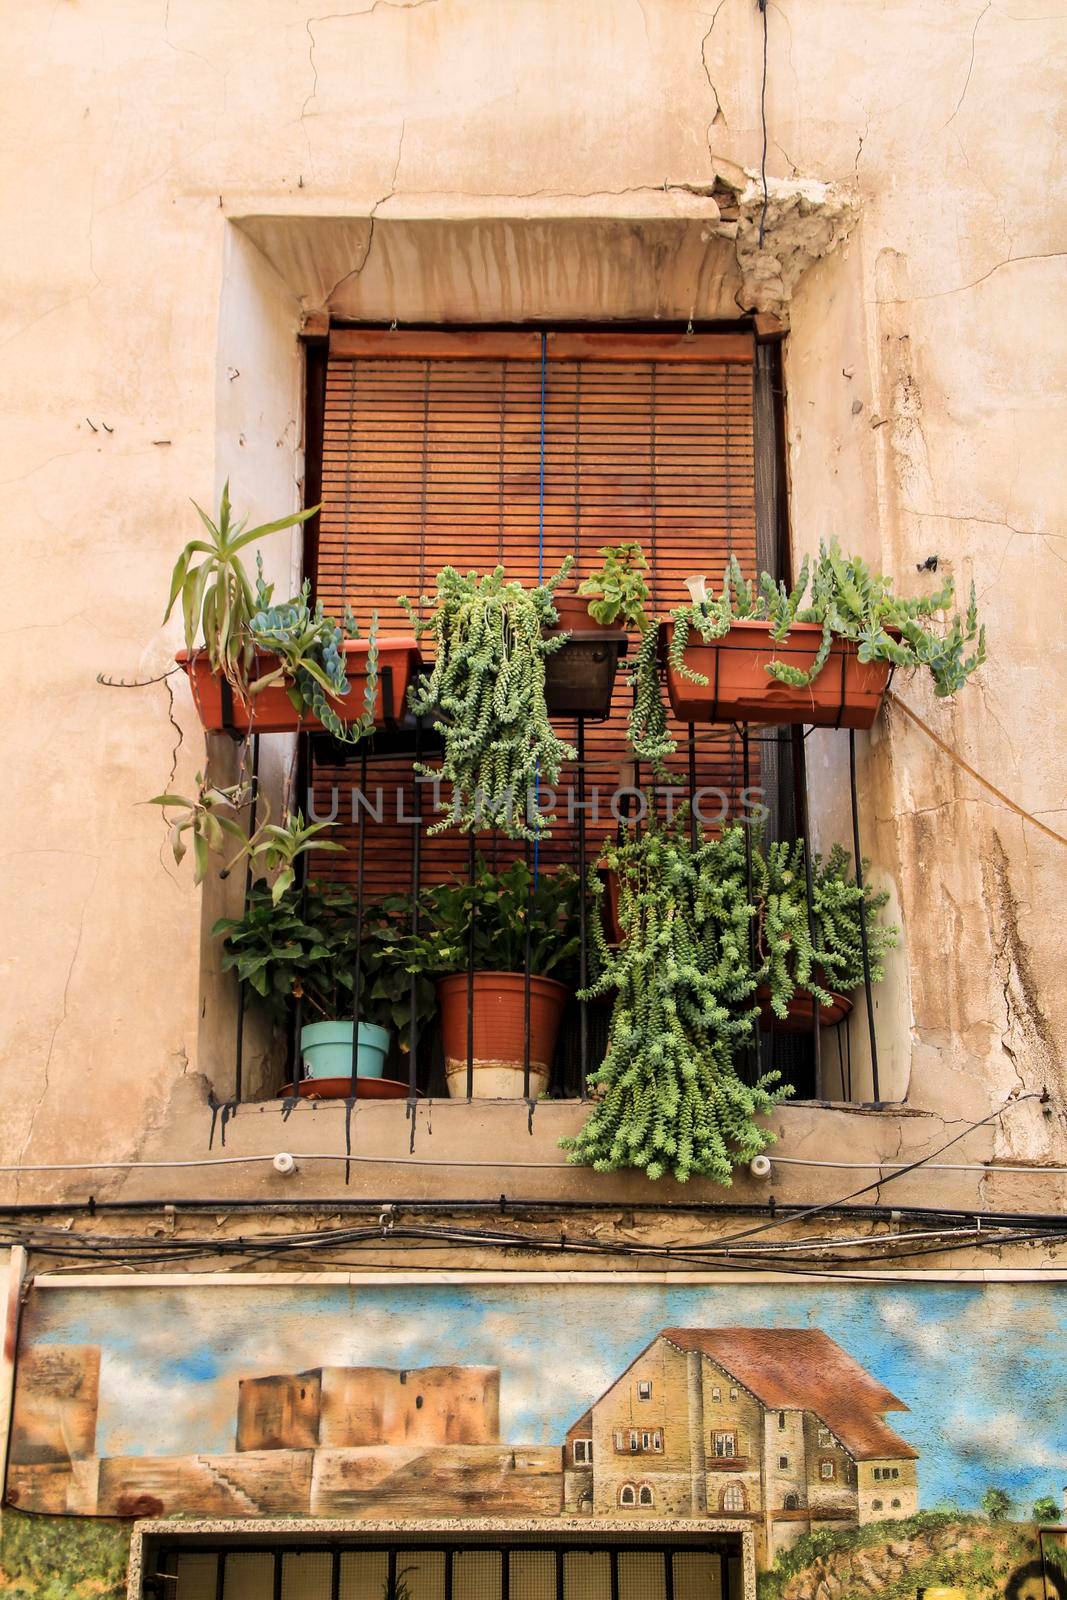 Novelda, Alicante, Spain- September 18, 2021: House facade with rusty balcony with a lot of pots and wooden blind in Novelda, Spain